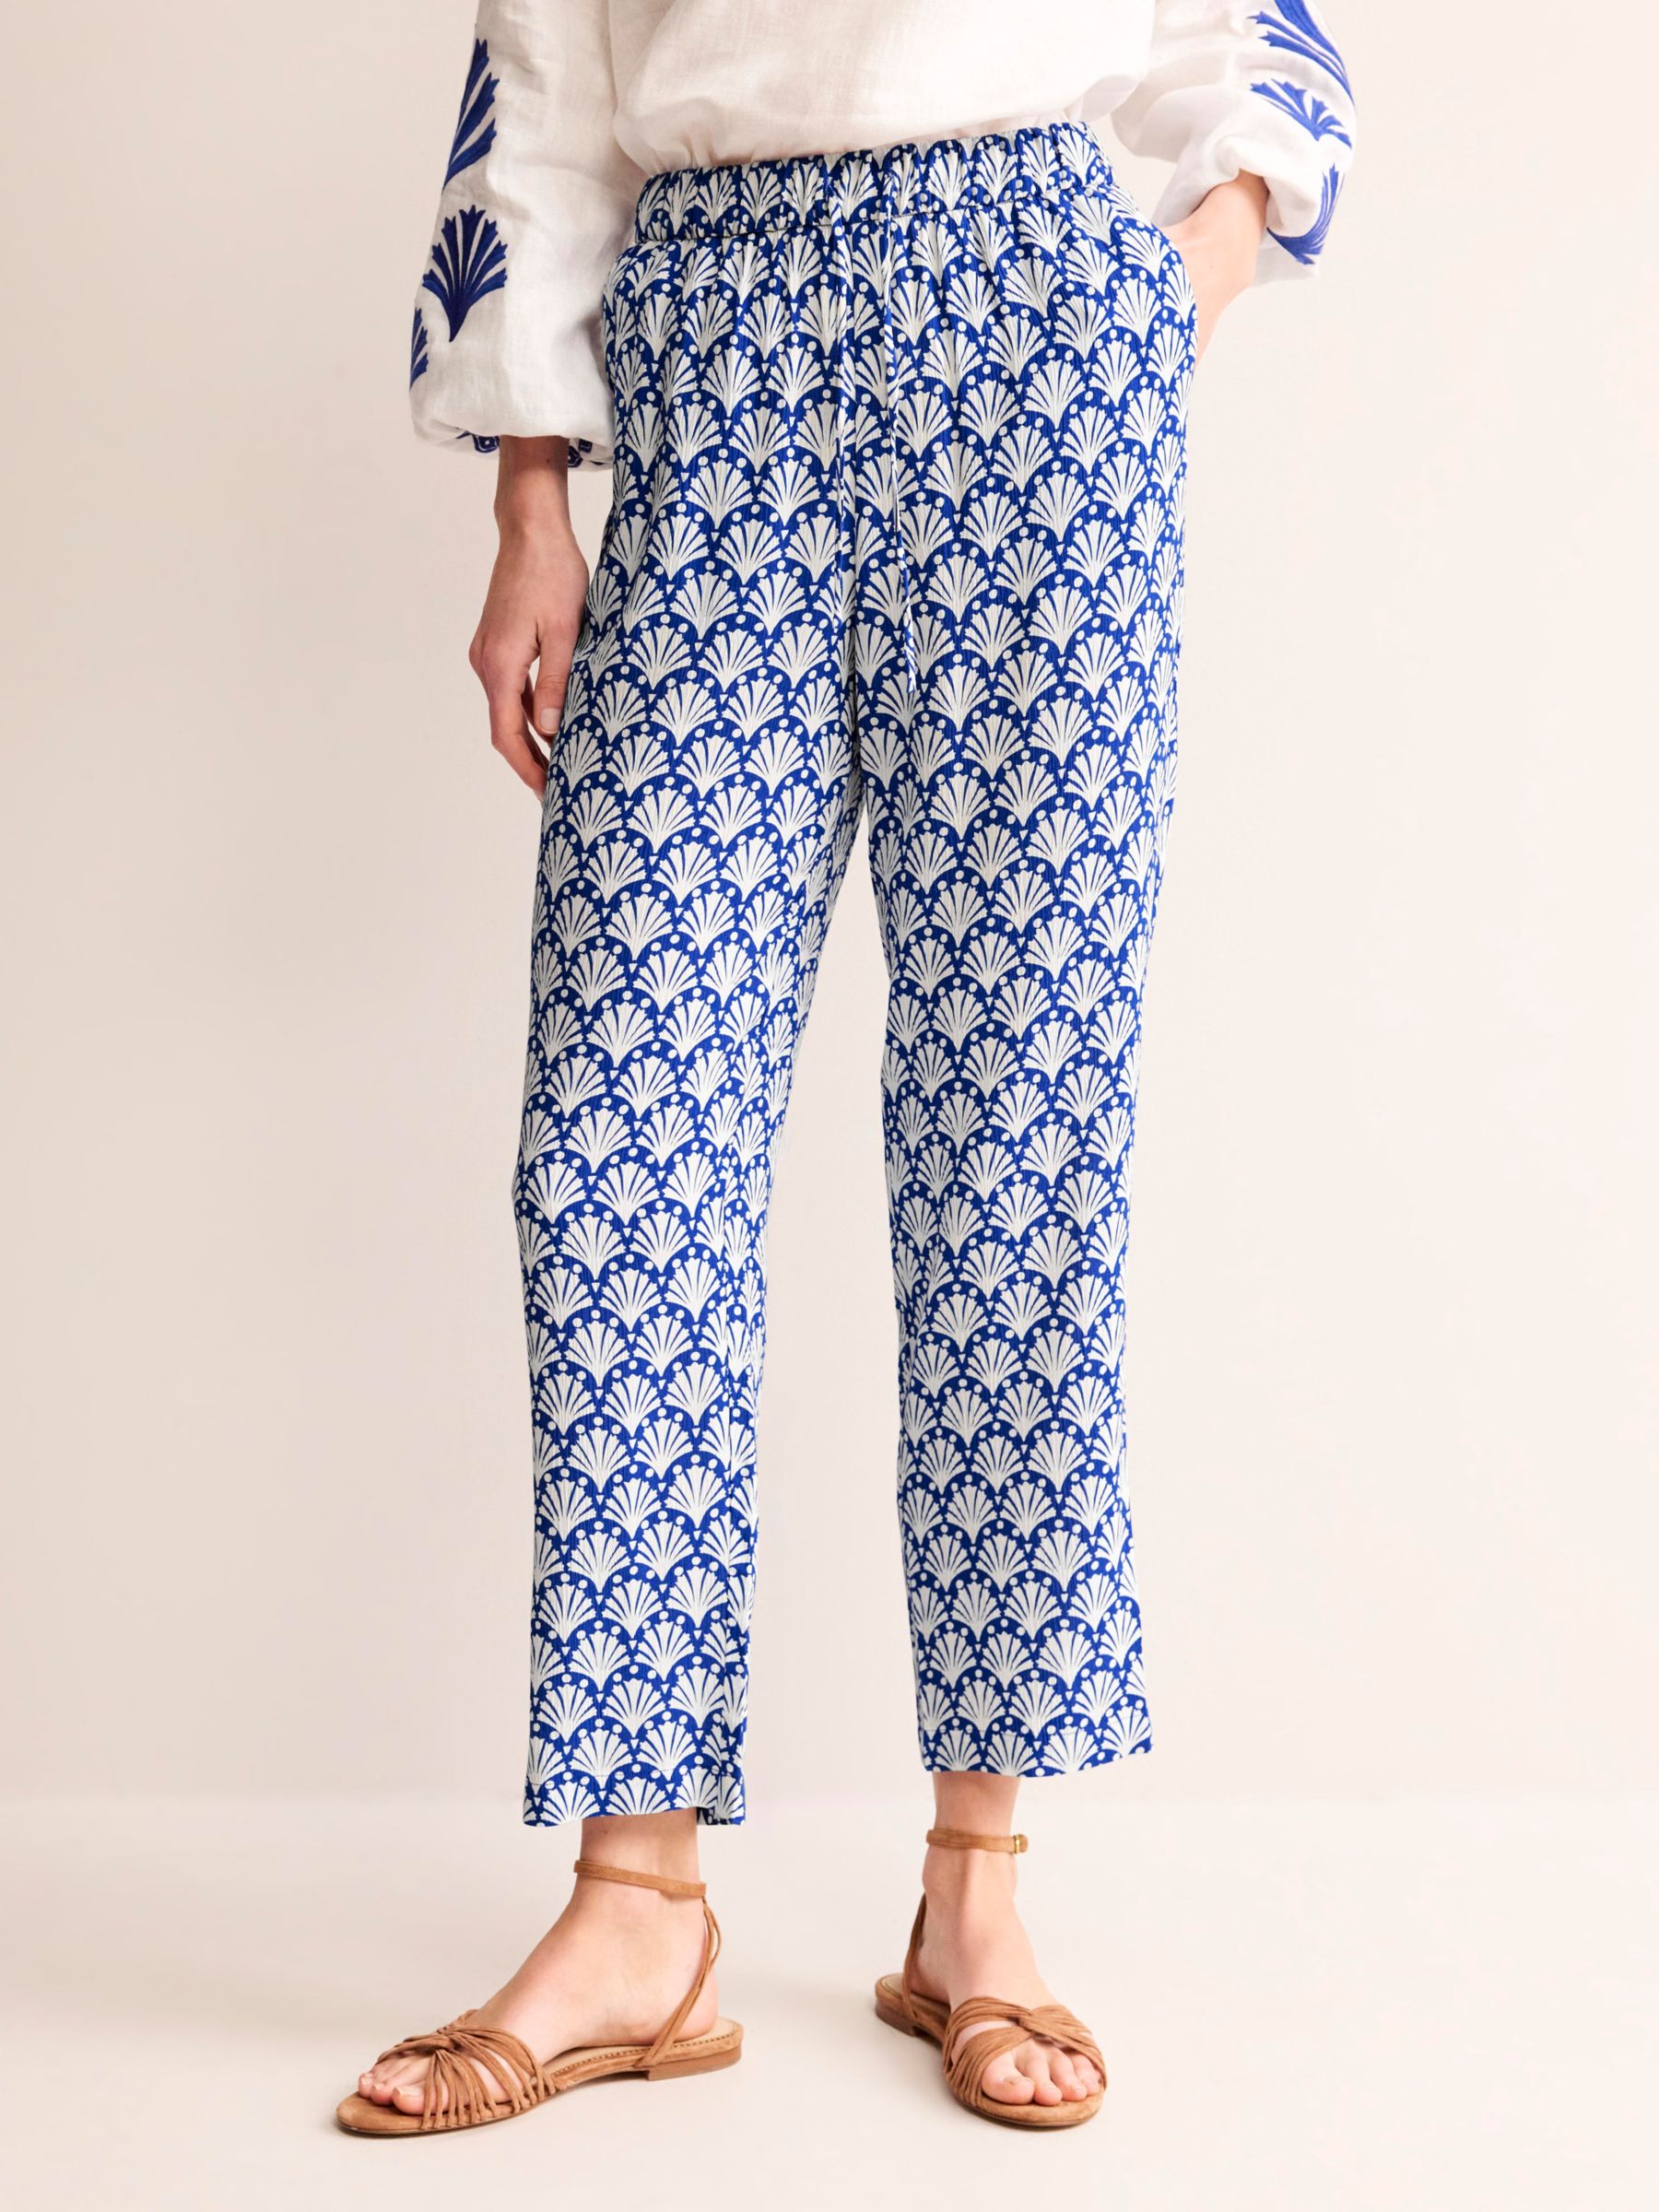 Boden Shells Print Crinkle Tapered Trousers, Ivory/Blue, 16